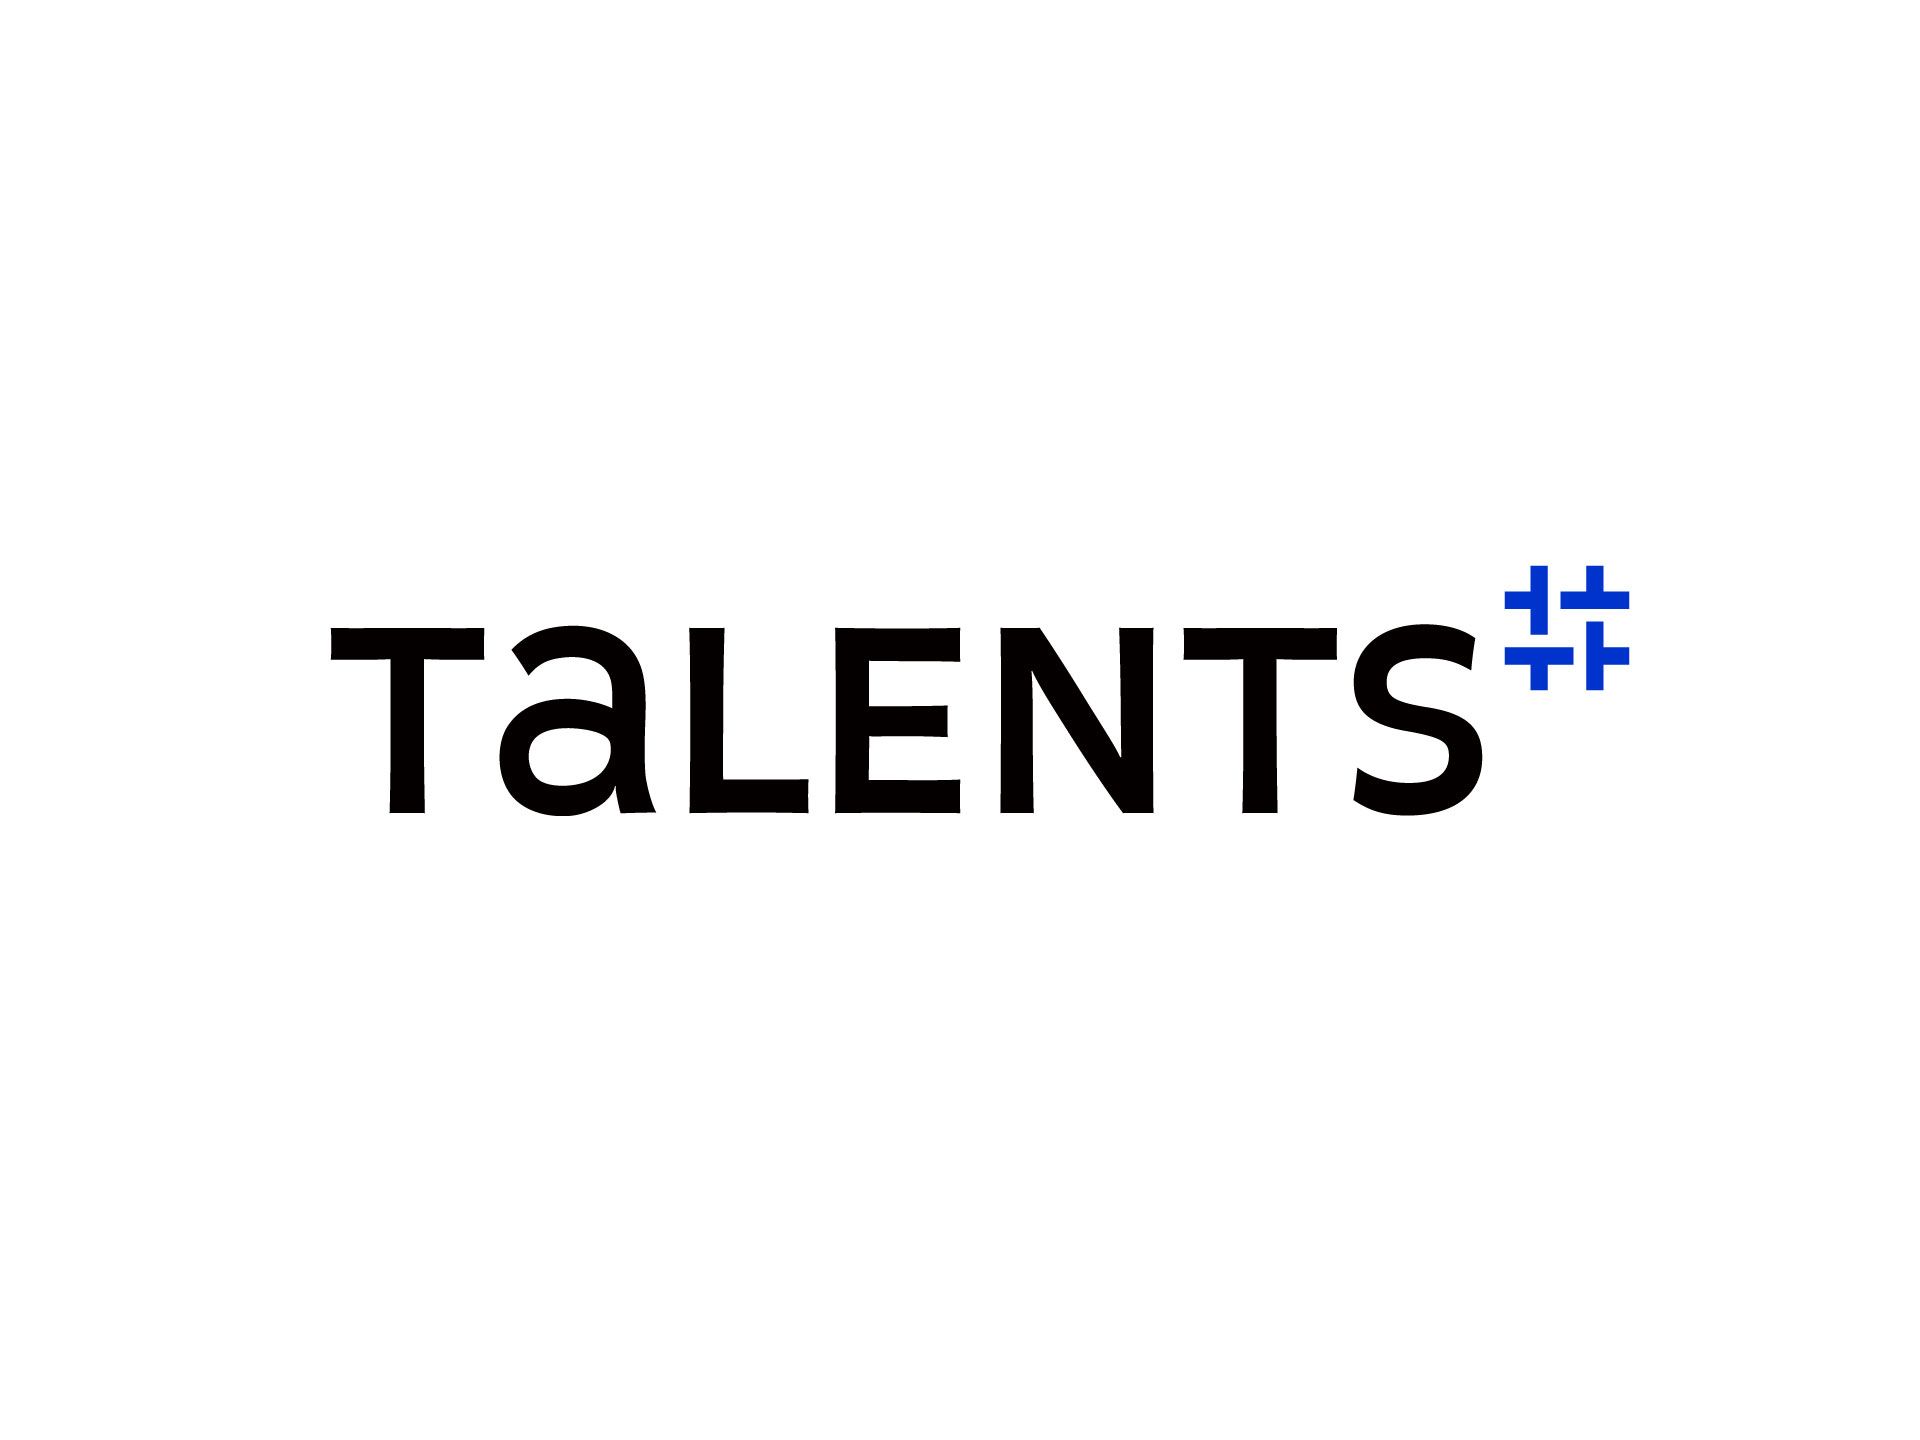 Design Shanghai TALENTS new logo launched!